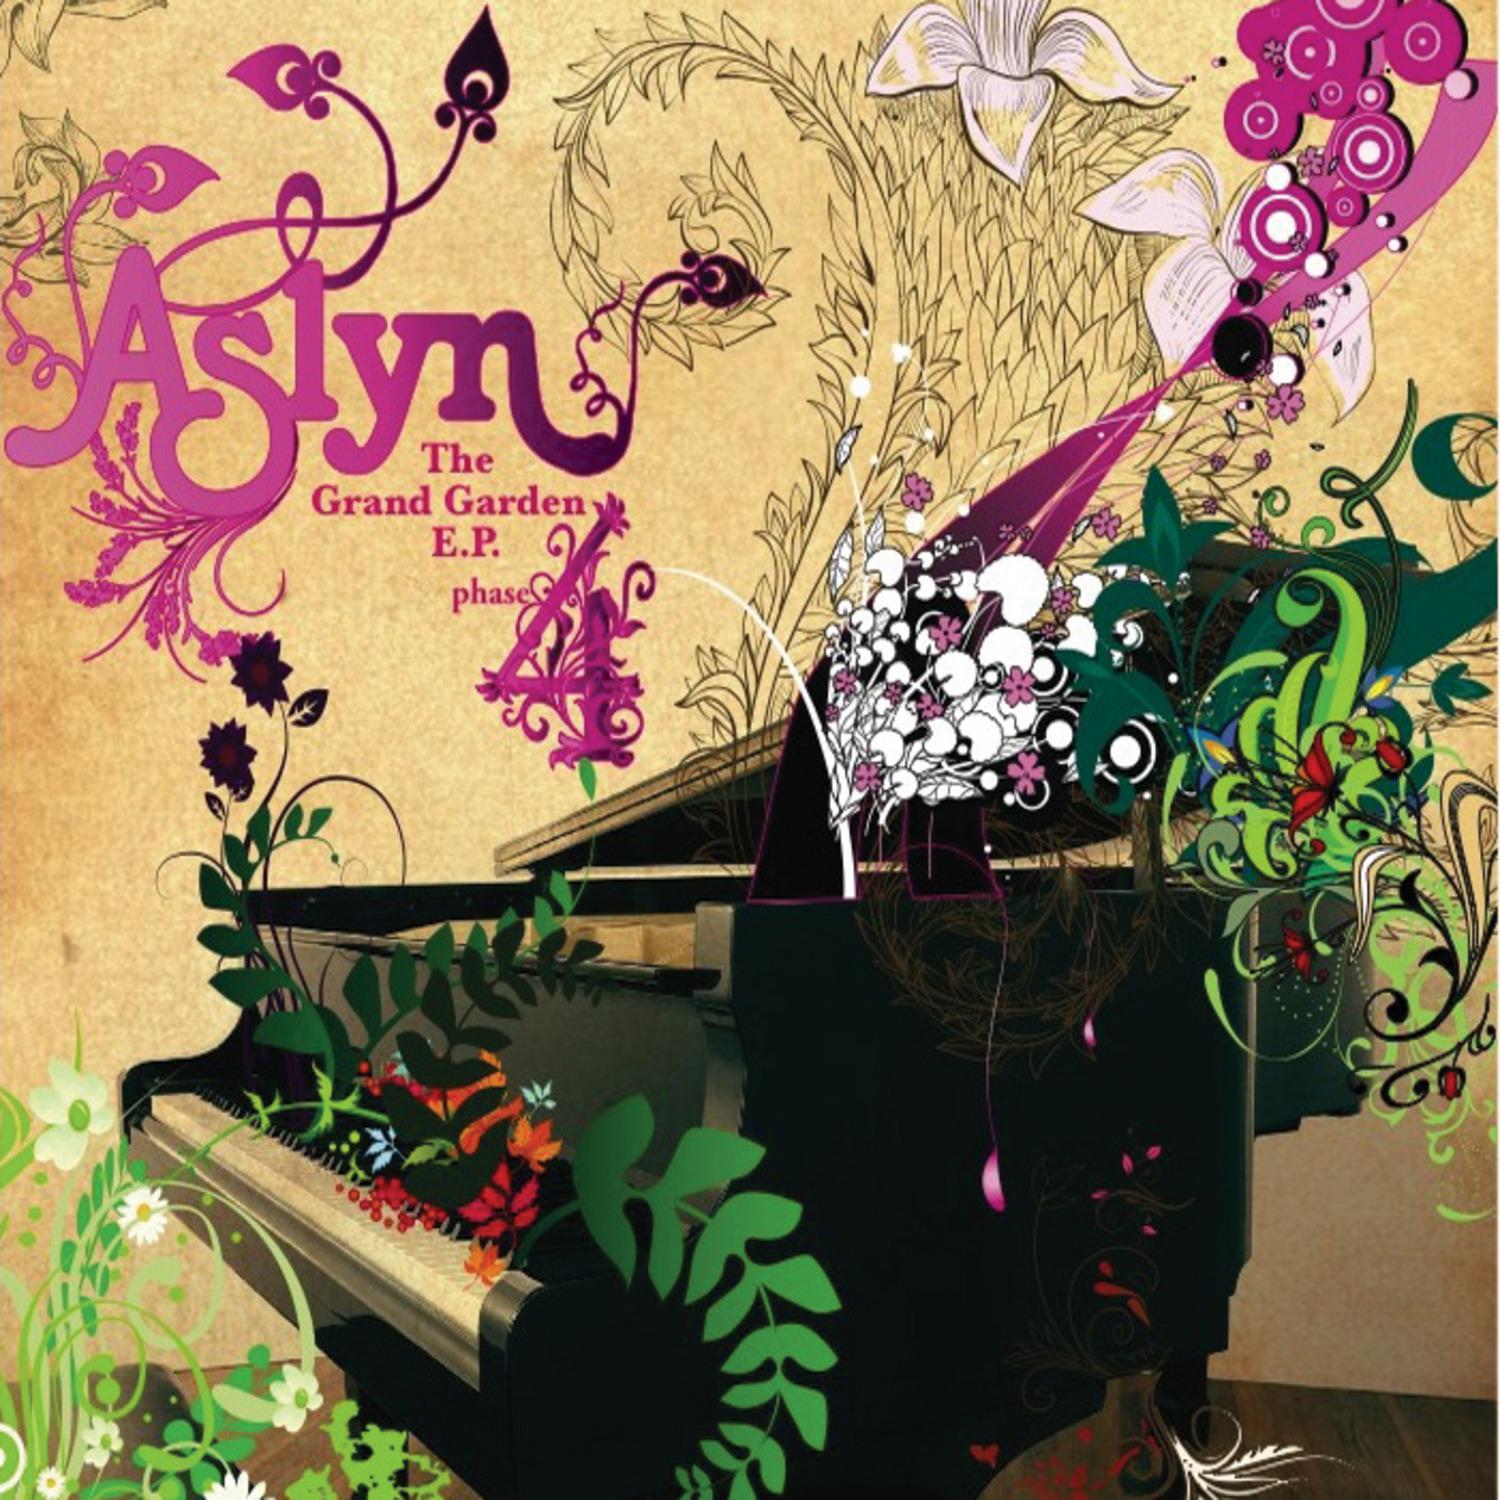 Aslyn - You Don't See